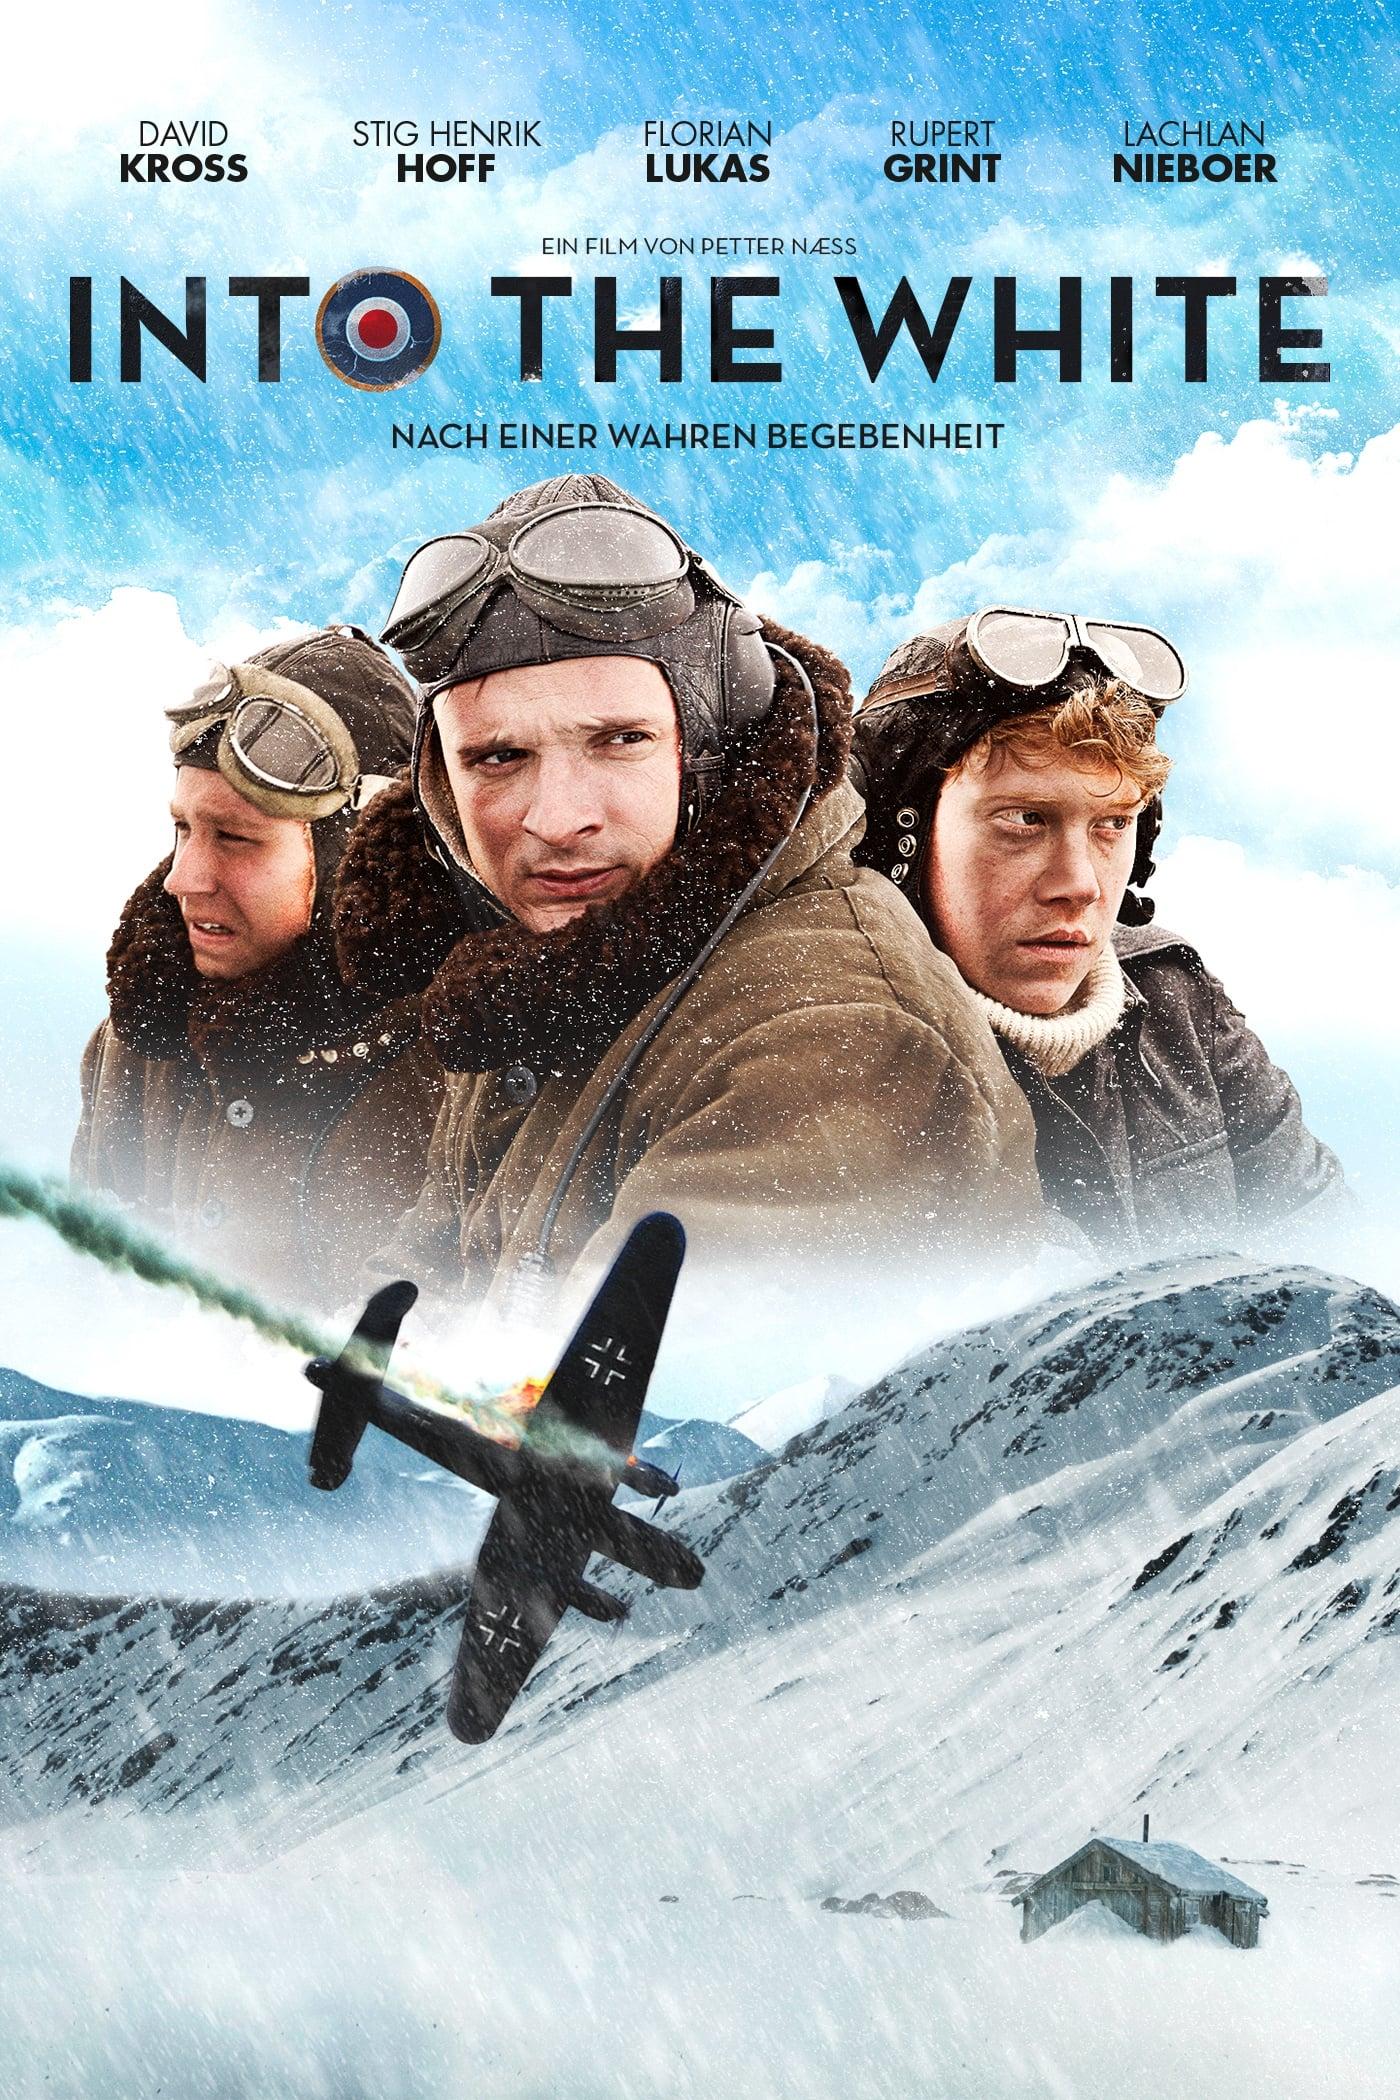 Into the White poster